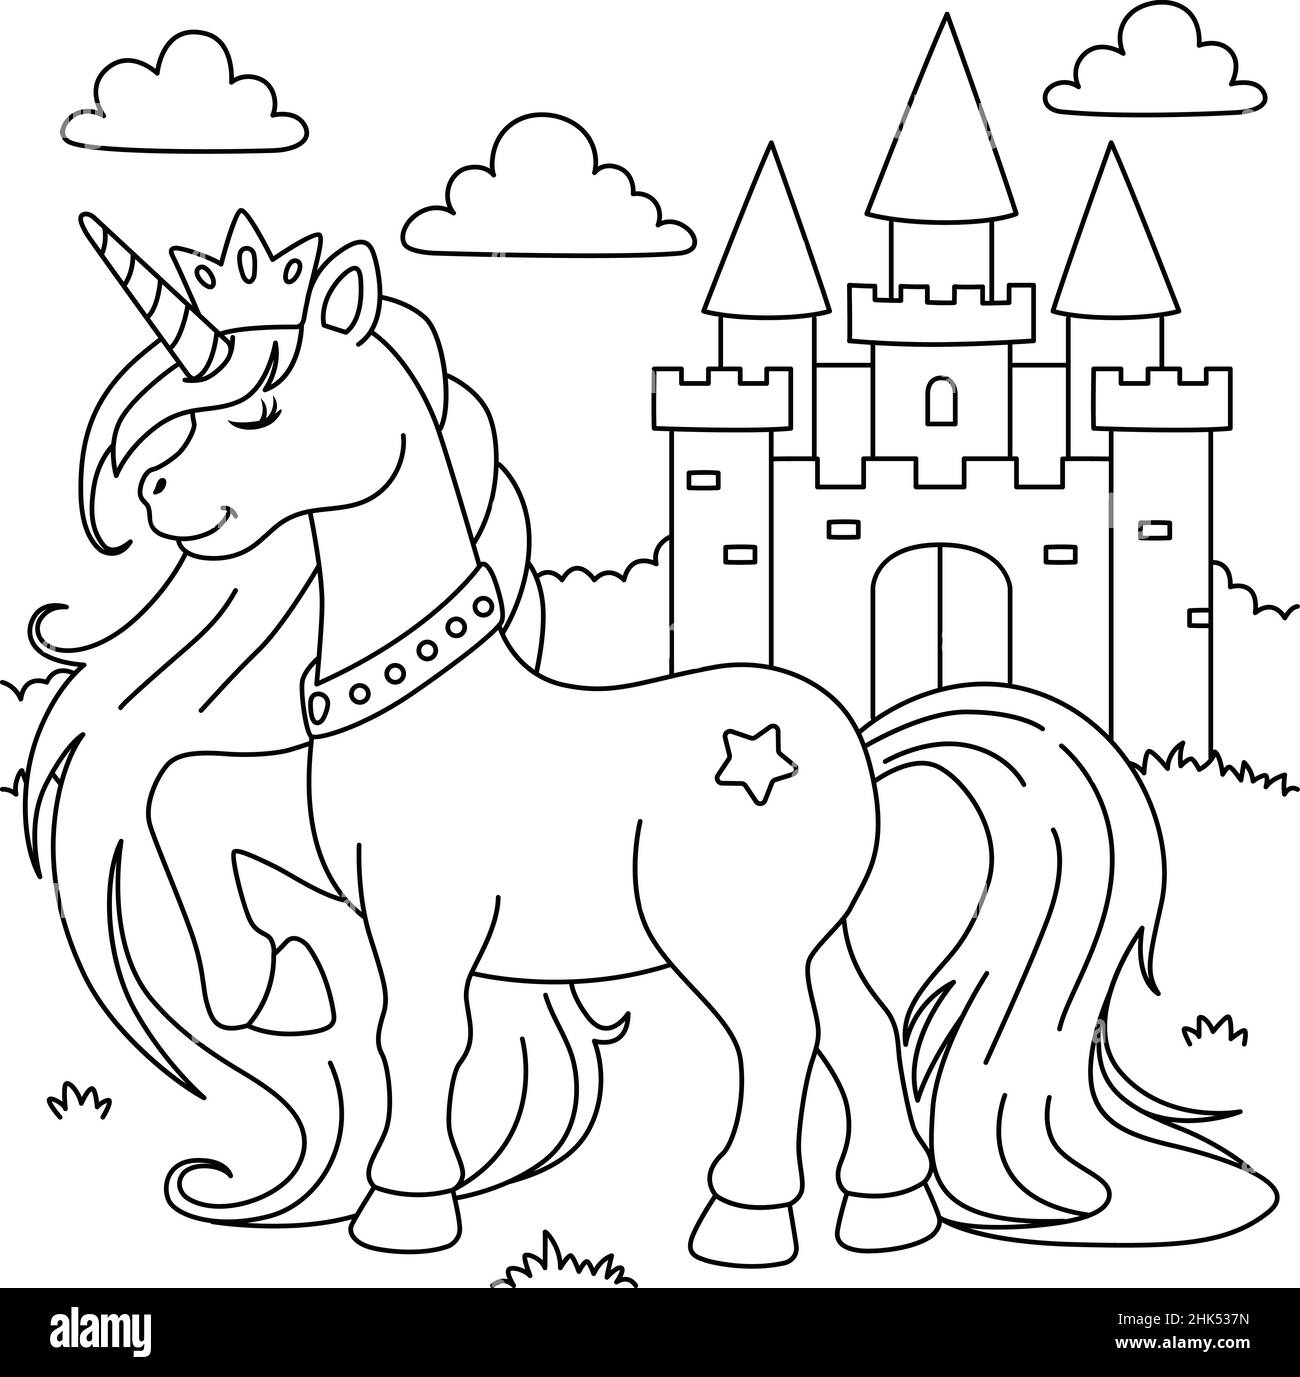 Unicorn Princess Coloring Page for Kids Stock Vector Image & Art ...